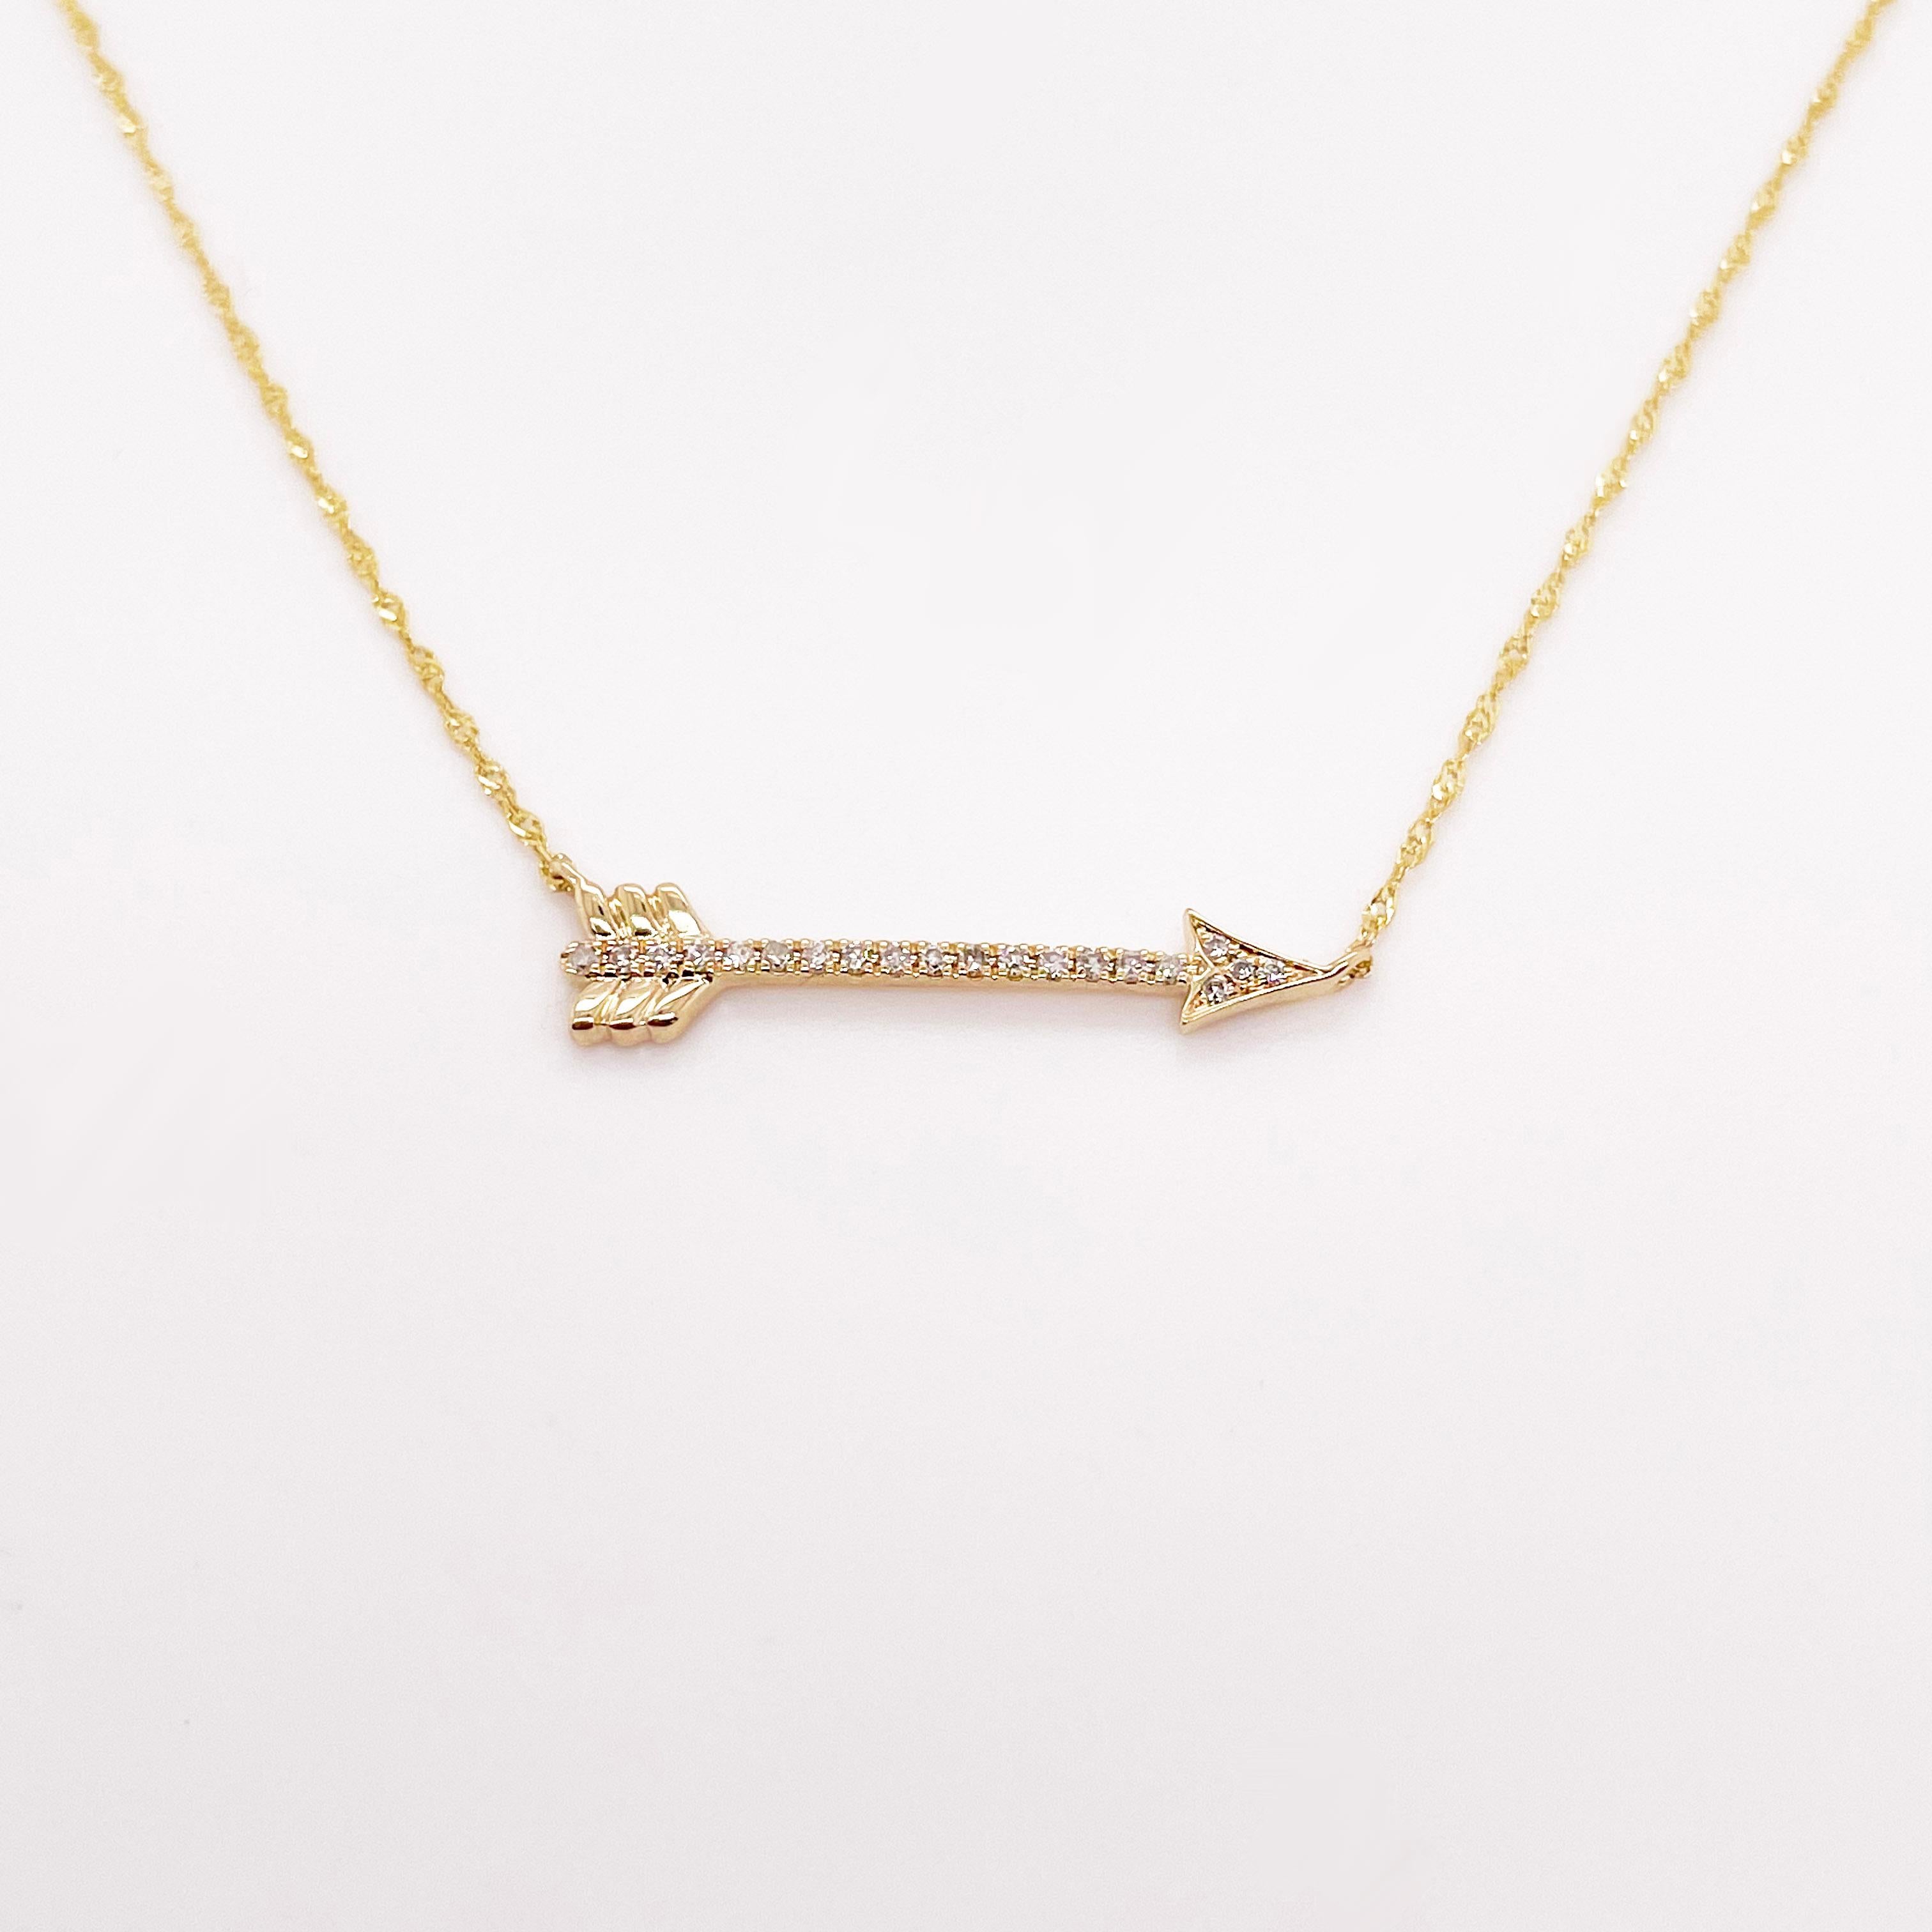 Adorable arrow necklace with genuine, natural diamonds set in pave prongs. The arrow is a symbol of guidance and achievements. If you have recently reached a goal or dream, this is the perfect gift to yourself! Remind yourself every day that you are